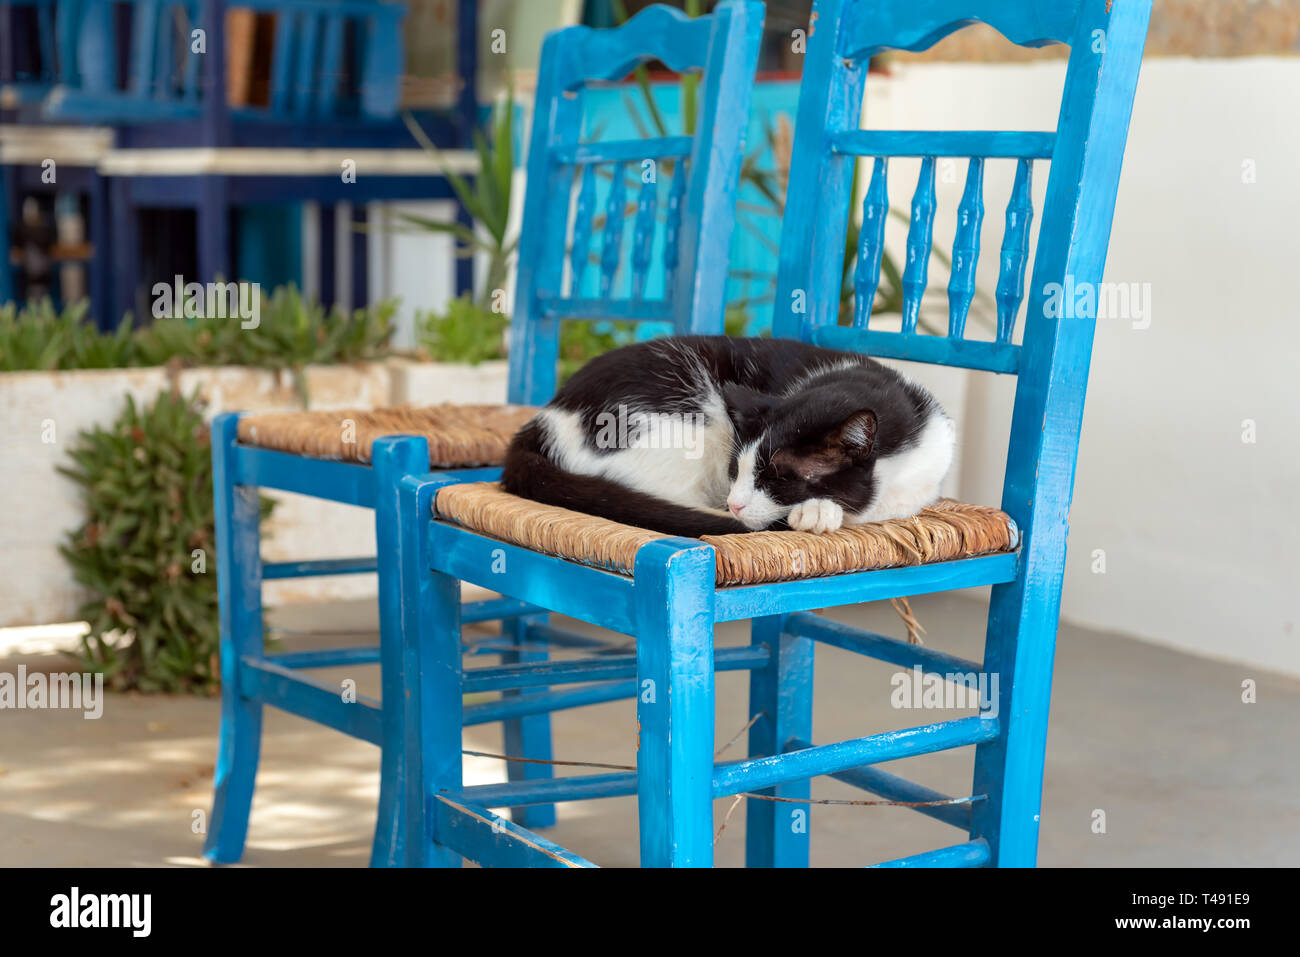 A cat sleeping in a blue chair. Island of Sifnos, Greece Stock Photo